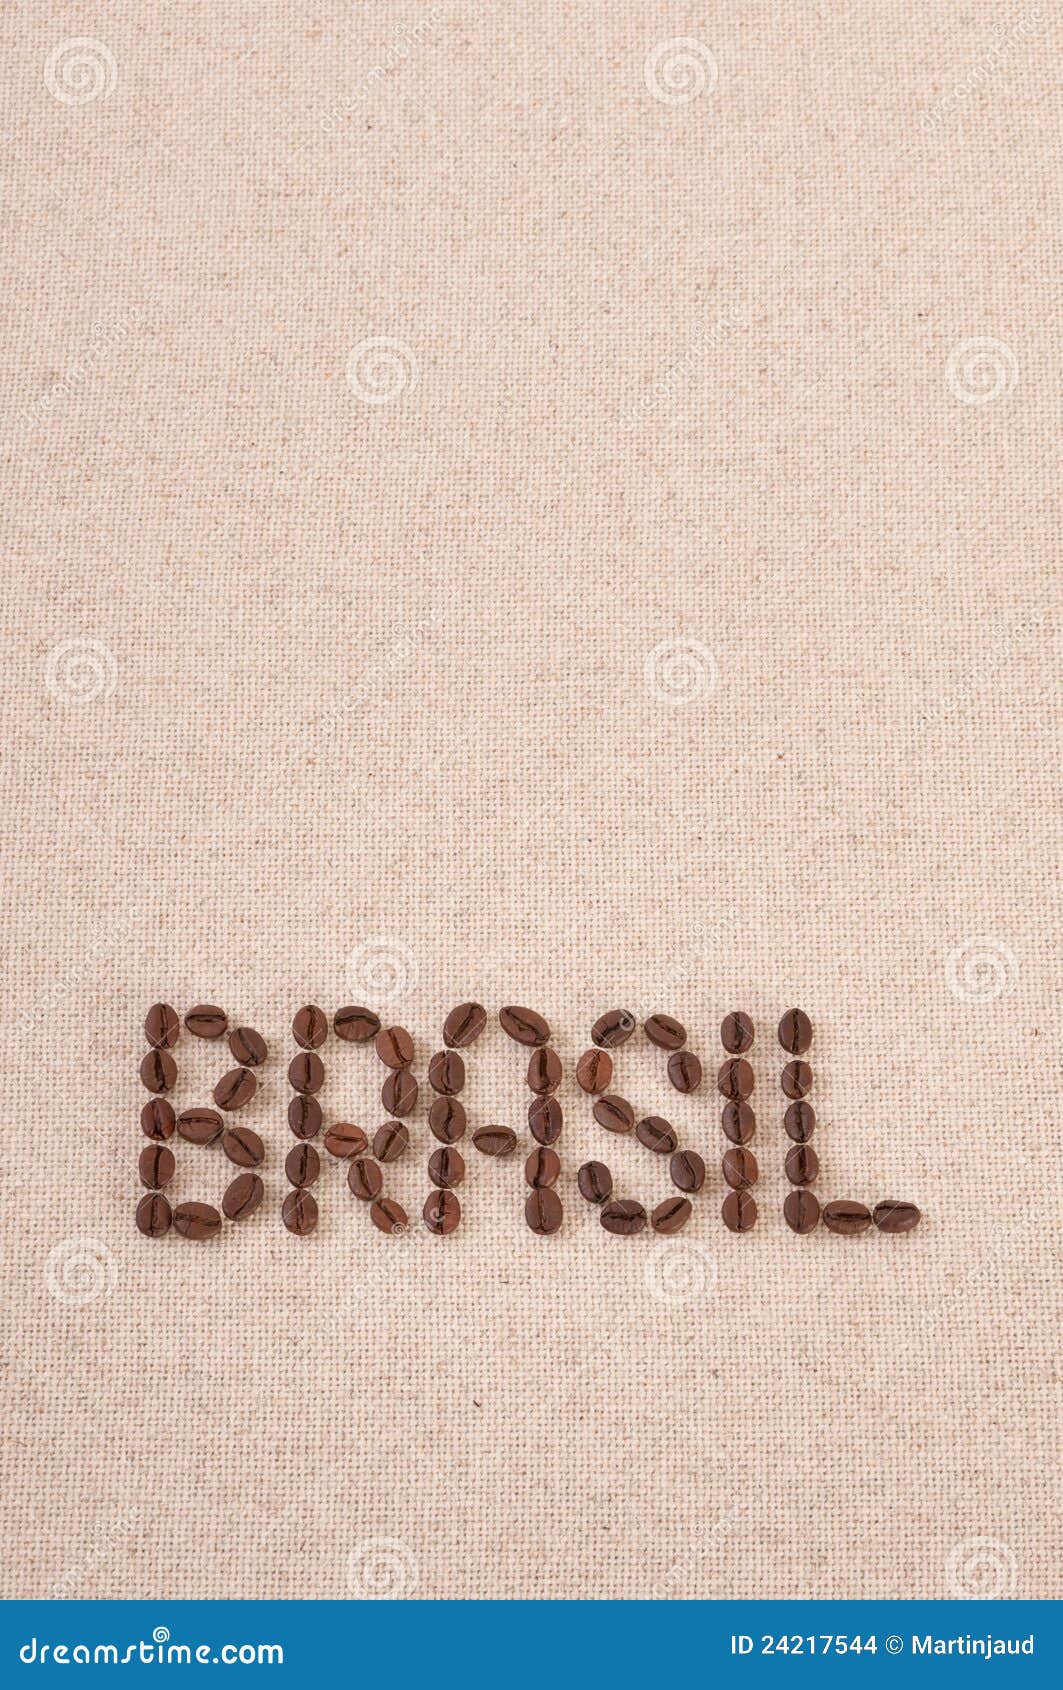 brasil written with coffee beans on canvas